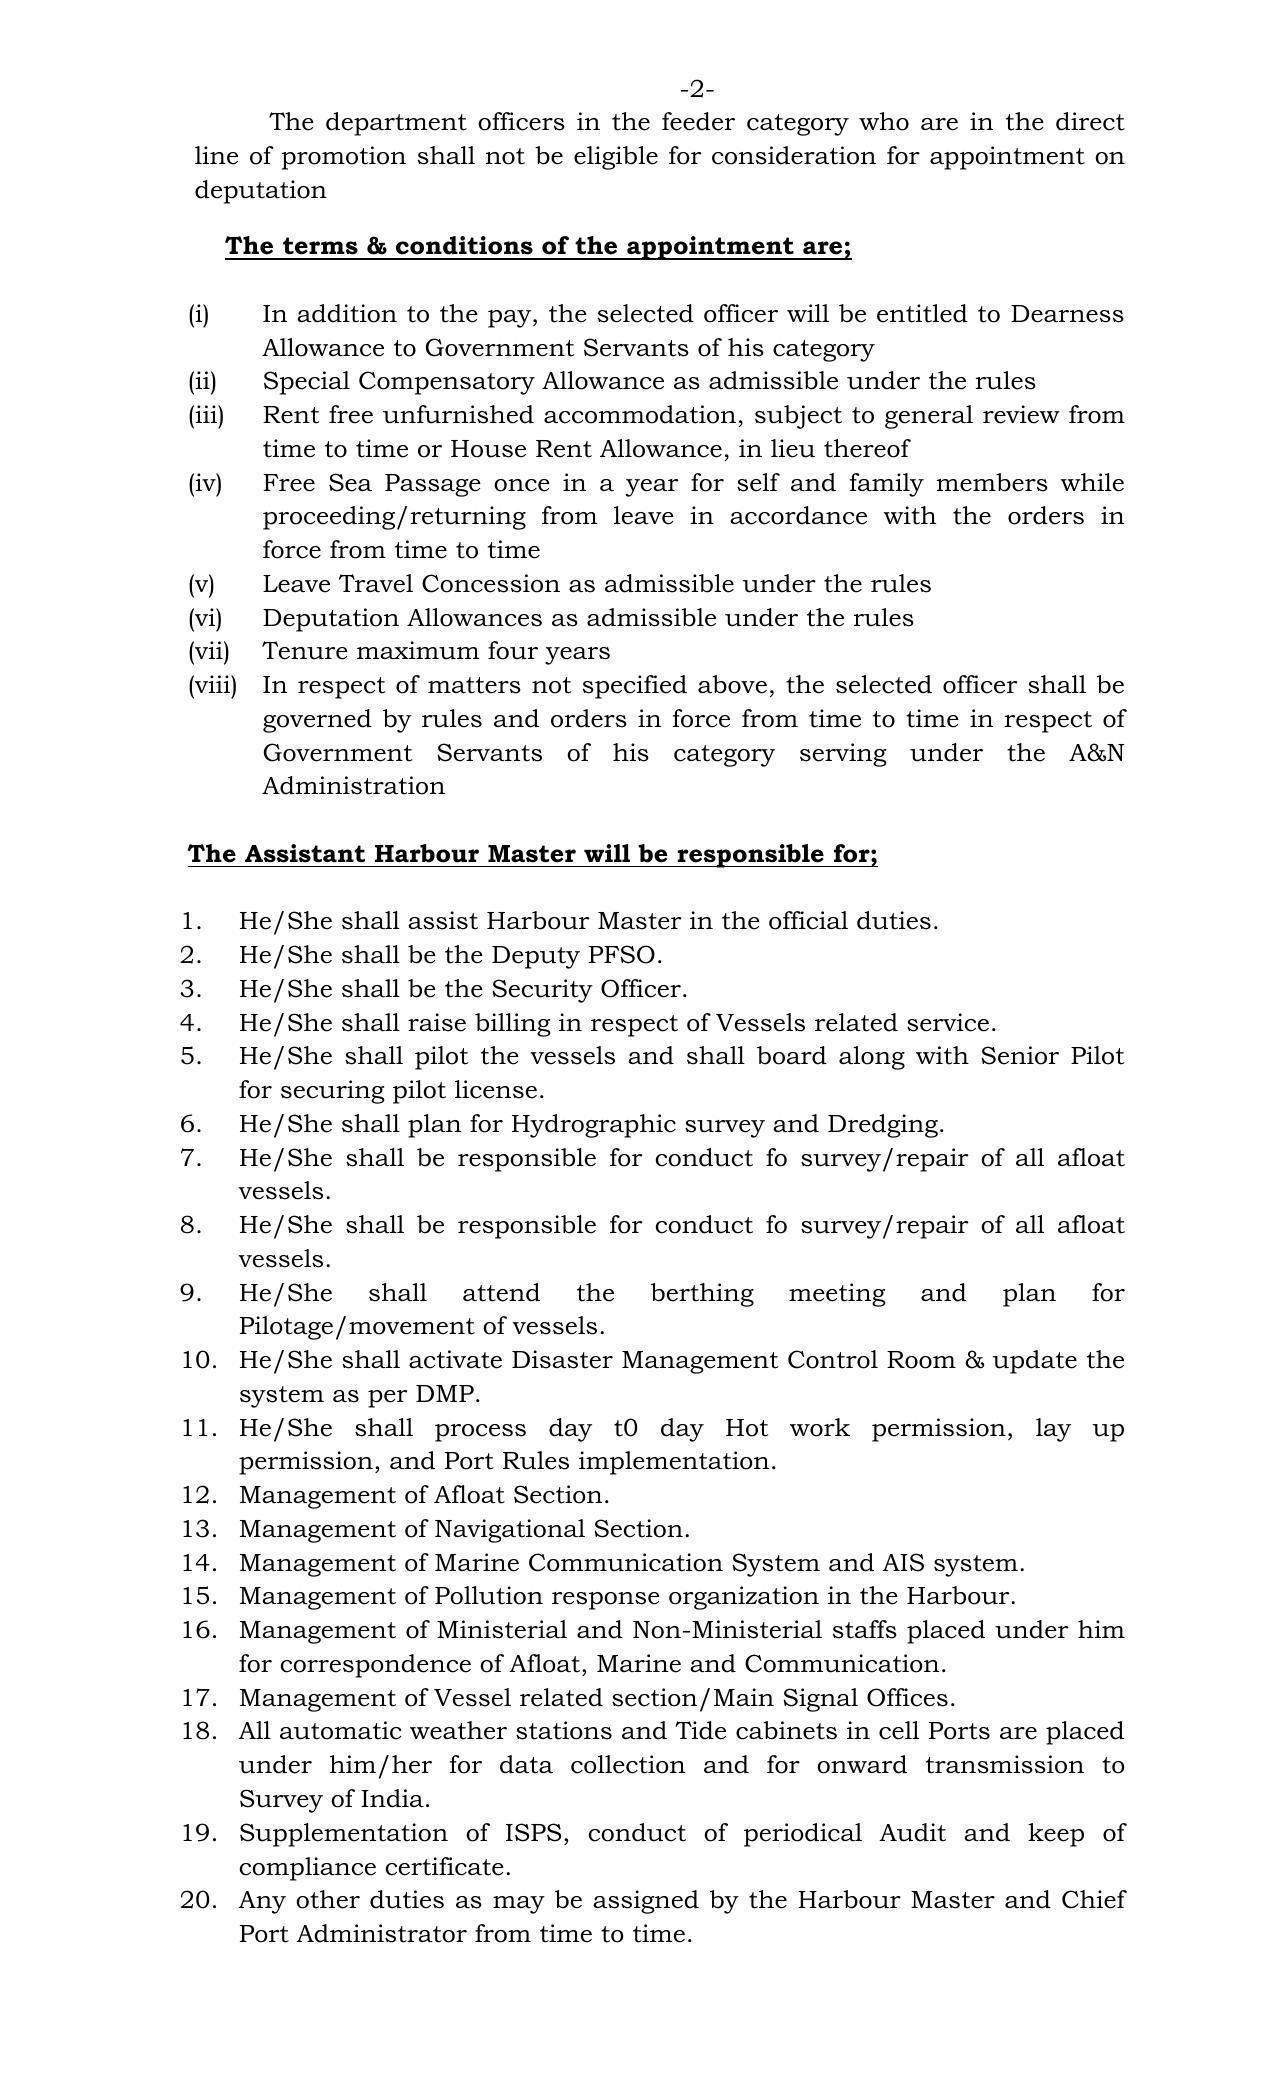 Andaman & Nicobar Administration Invites Application for Assistant Harbour Master Recruitment 2022 - Page 2